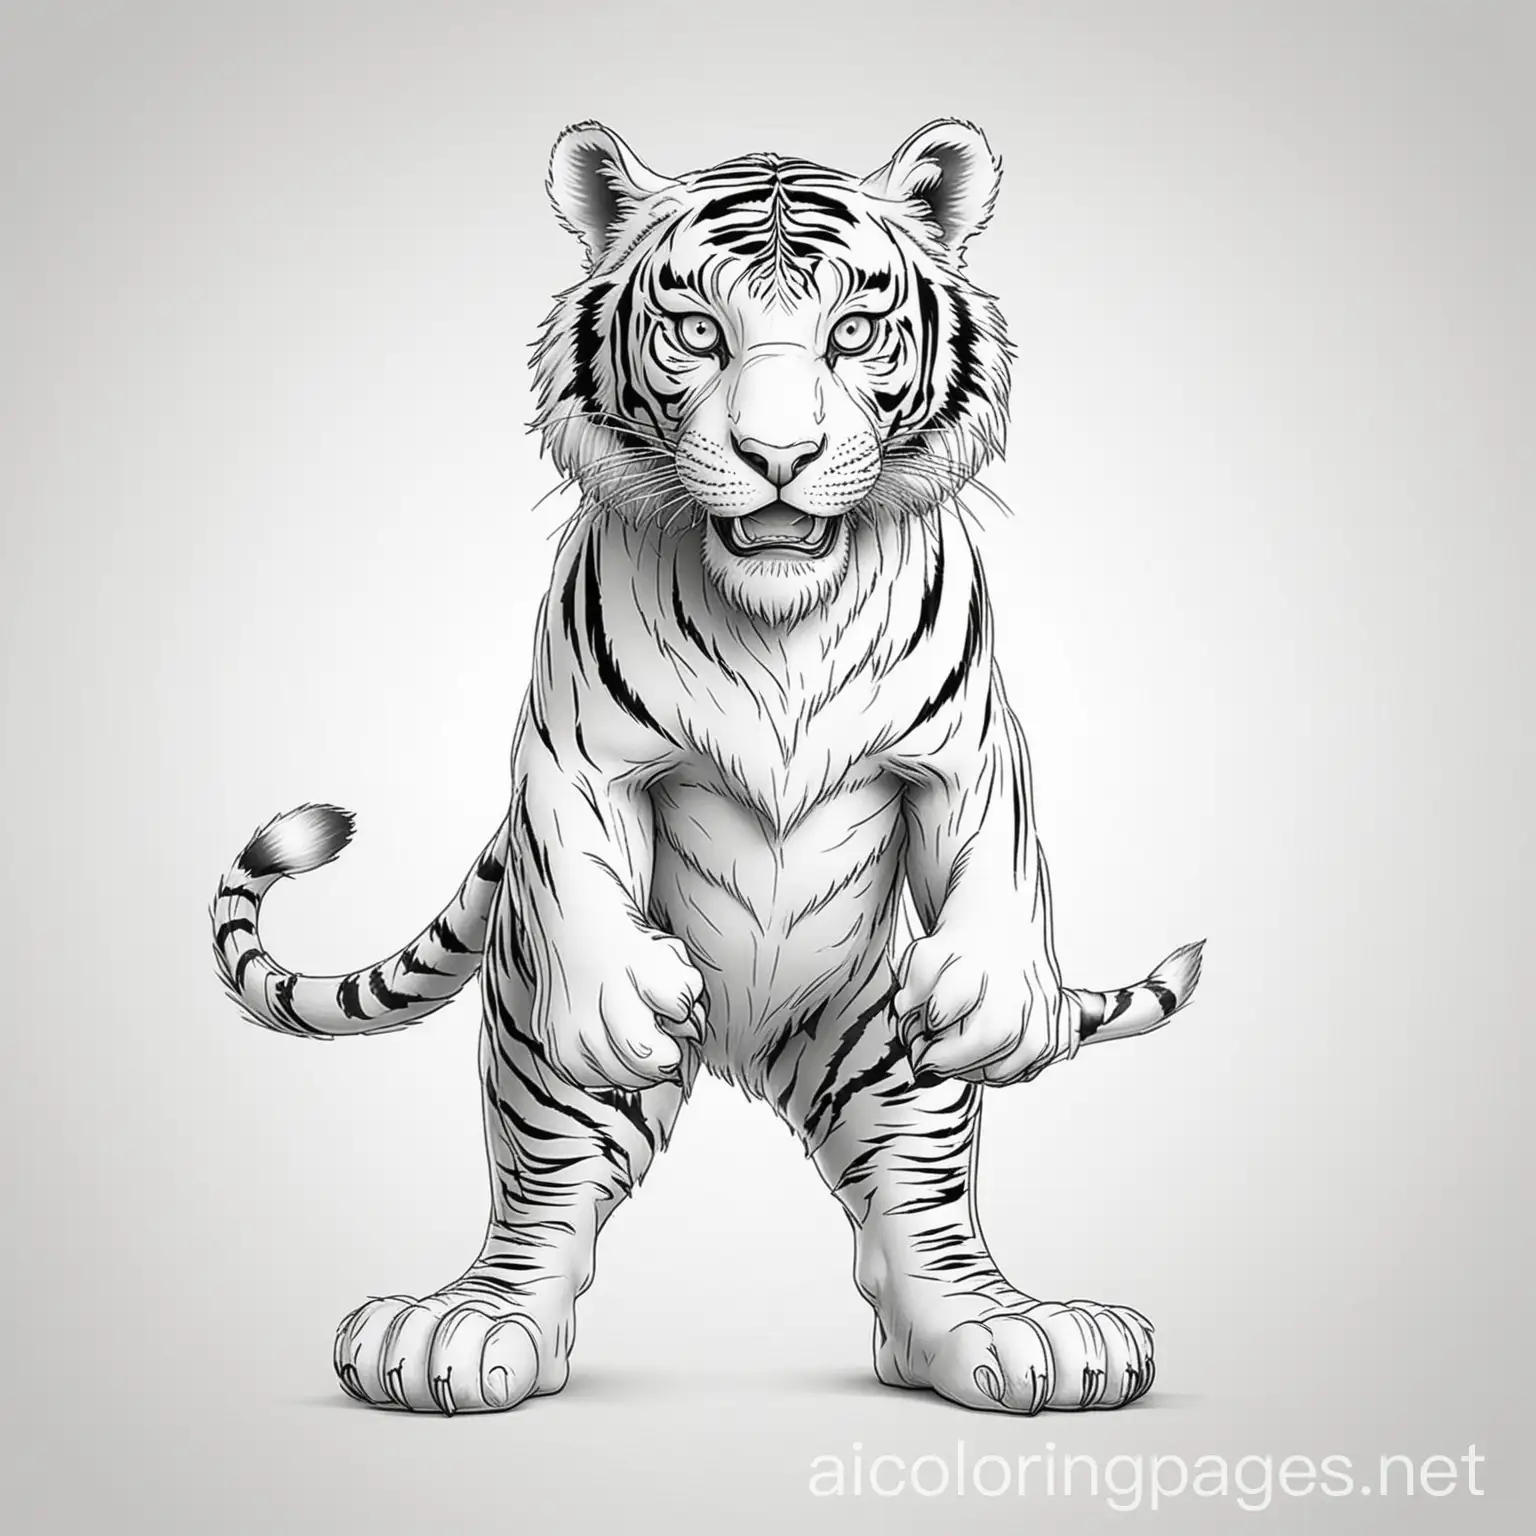 Fierce-Cartoon-Tiger-Coloring-Page-ReadytoAttack-Tiger-in-Detailed-Line-Art